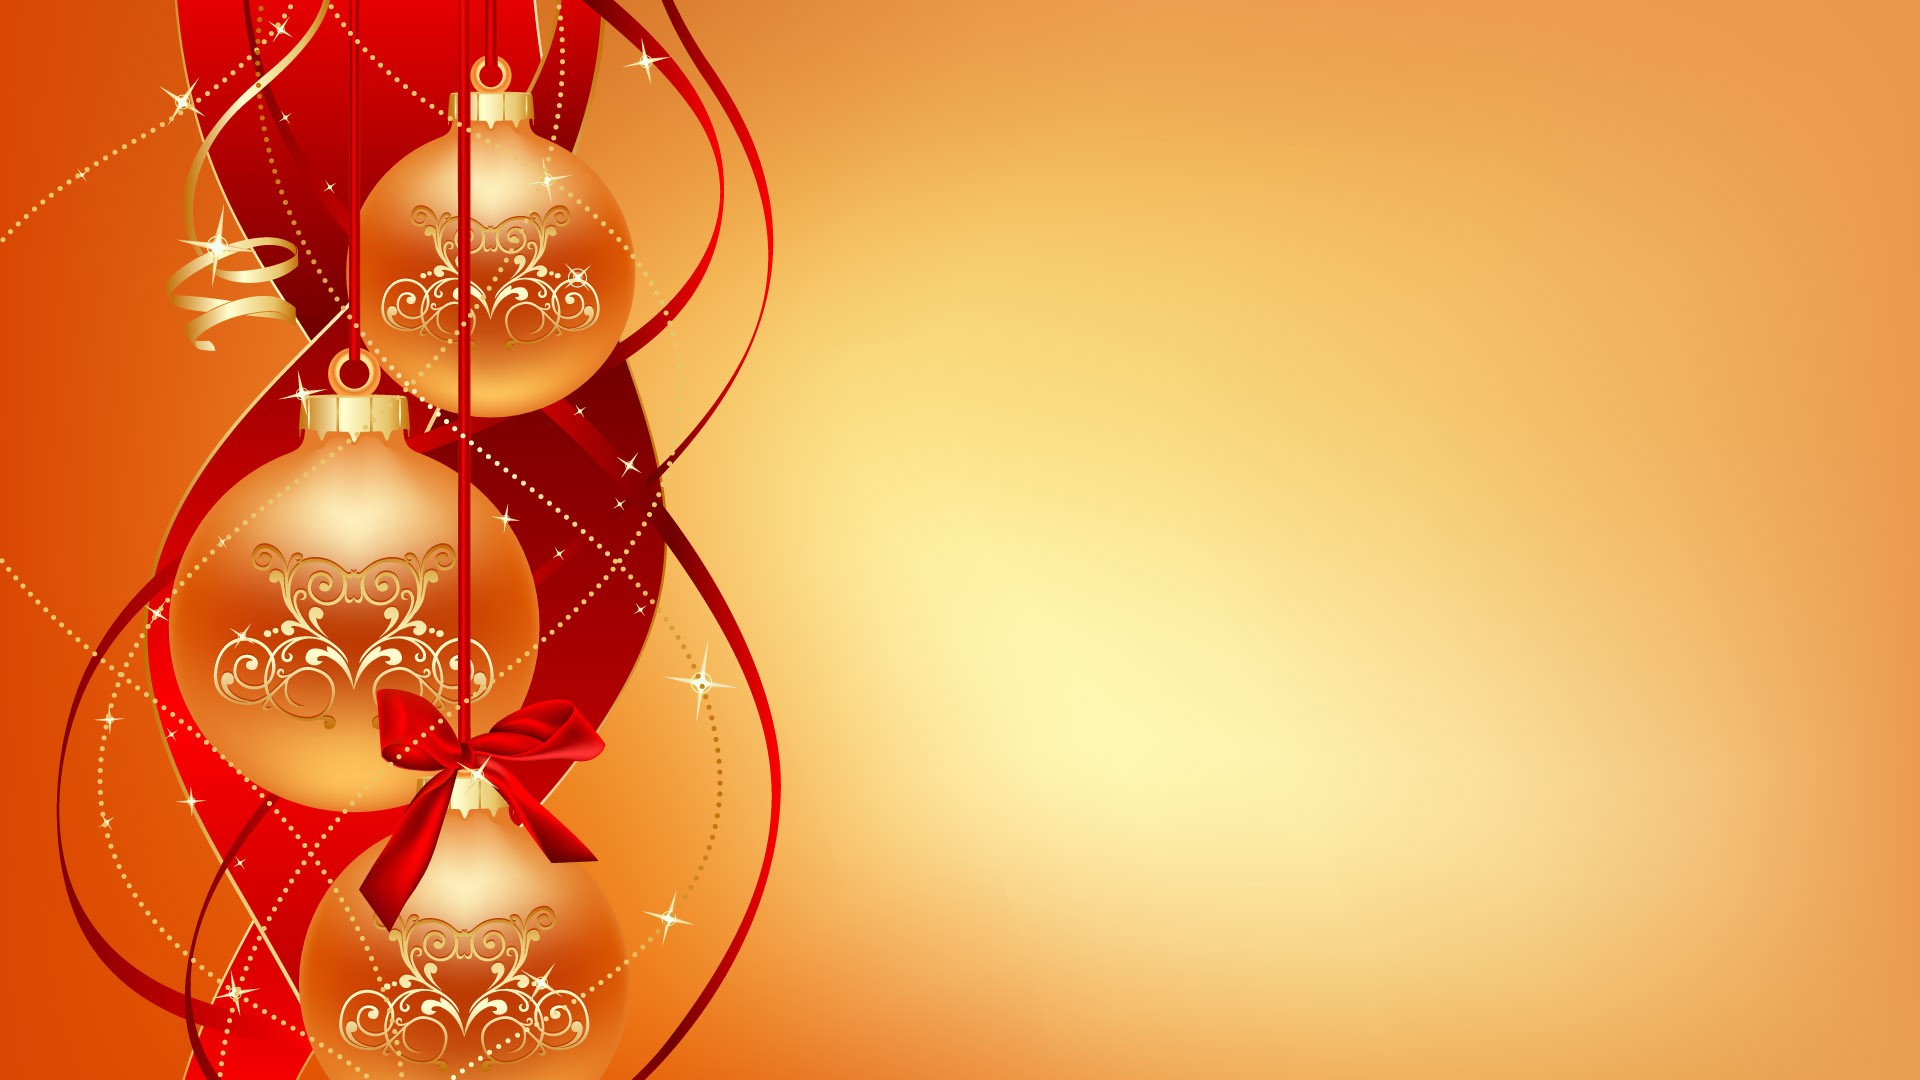 Exquisite Christmas Theme HD Wallpapers #27 - 1920x1080